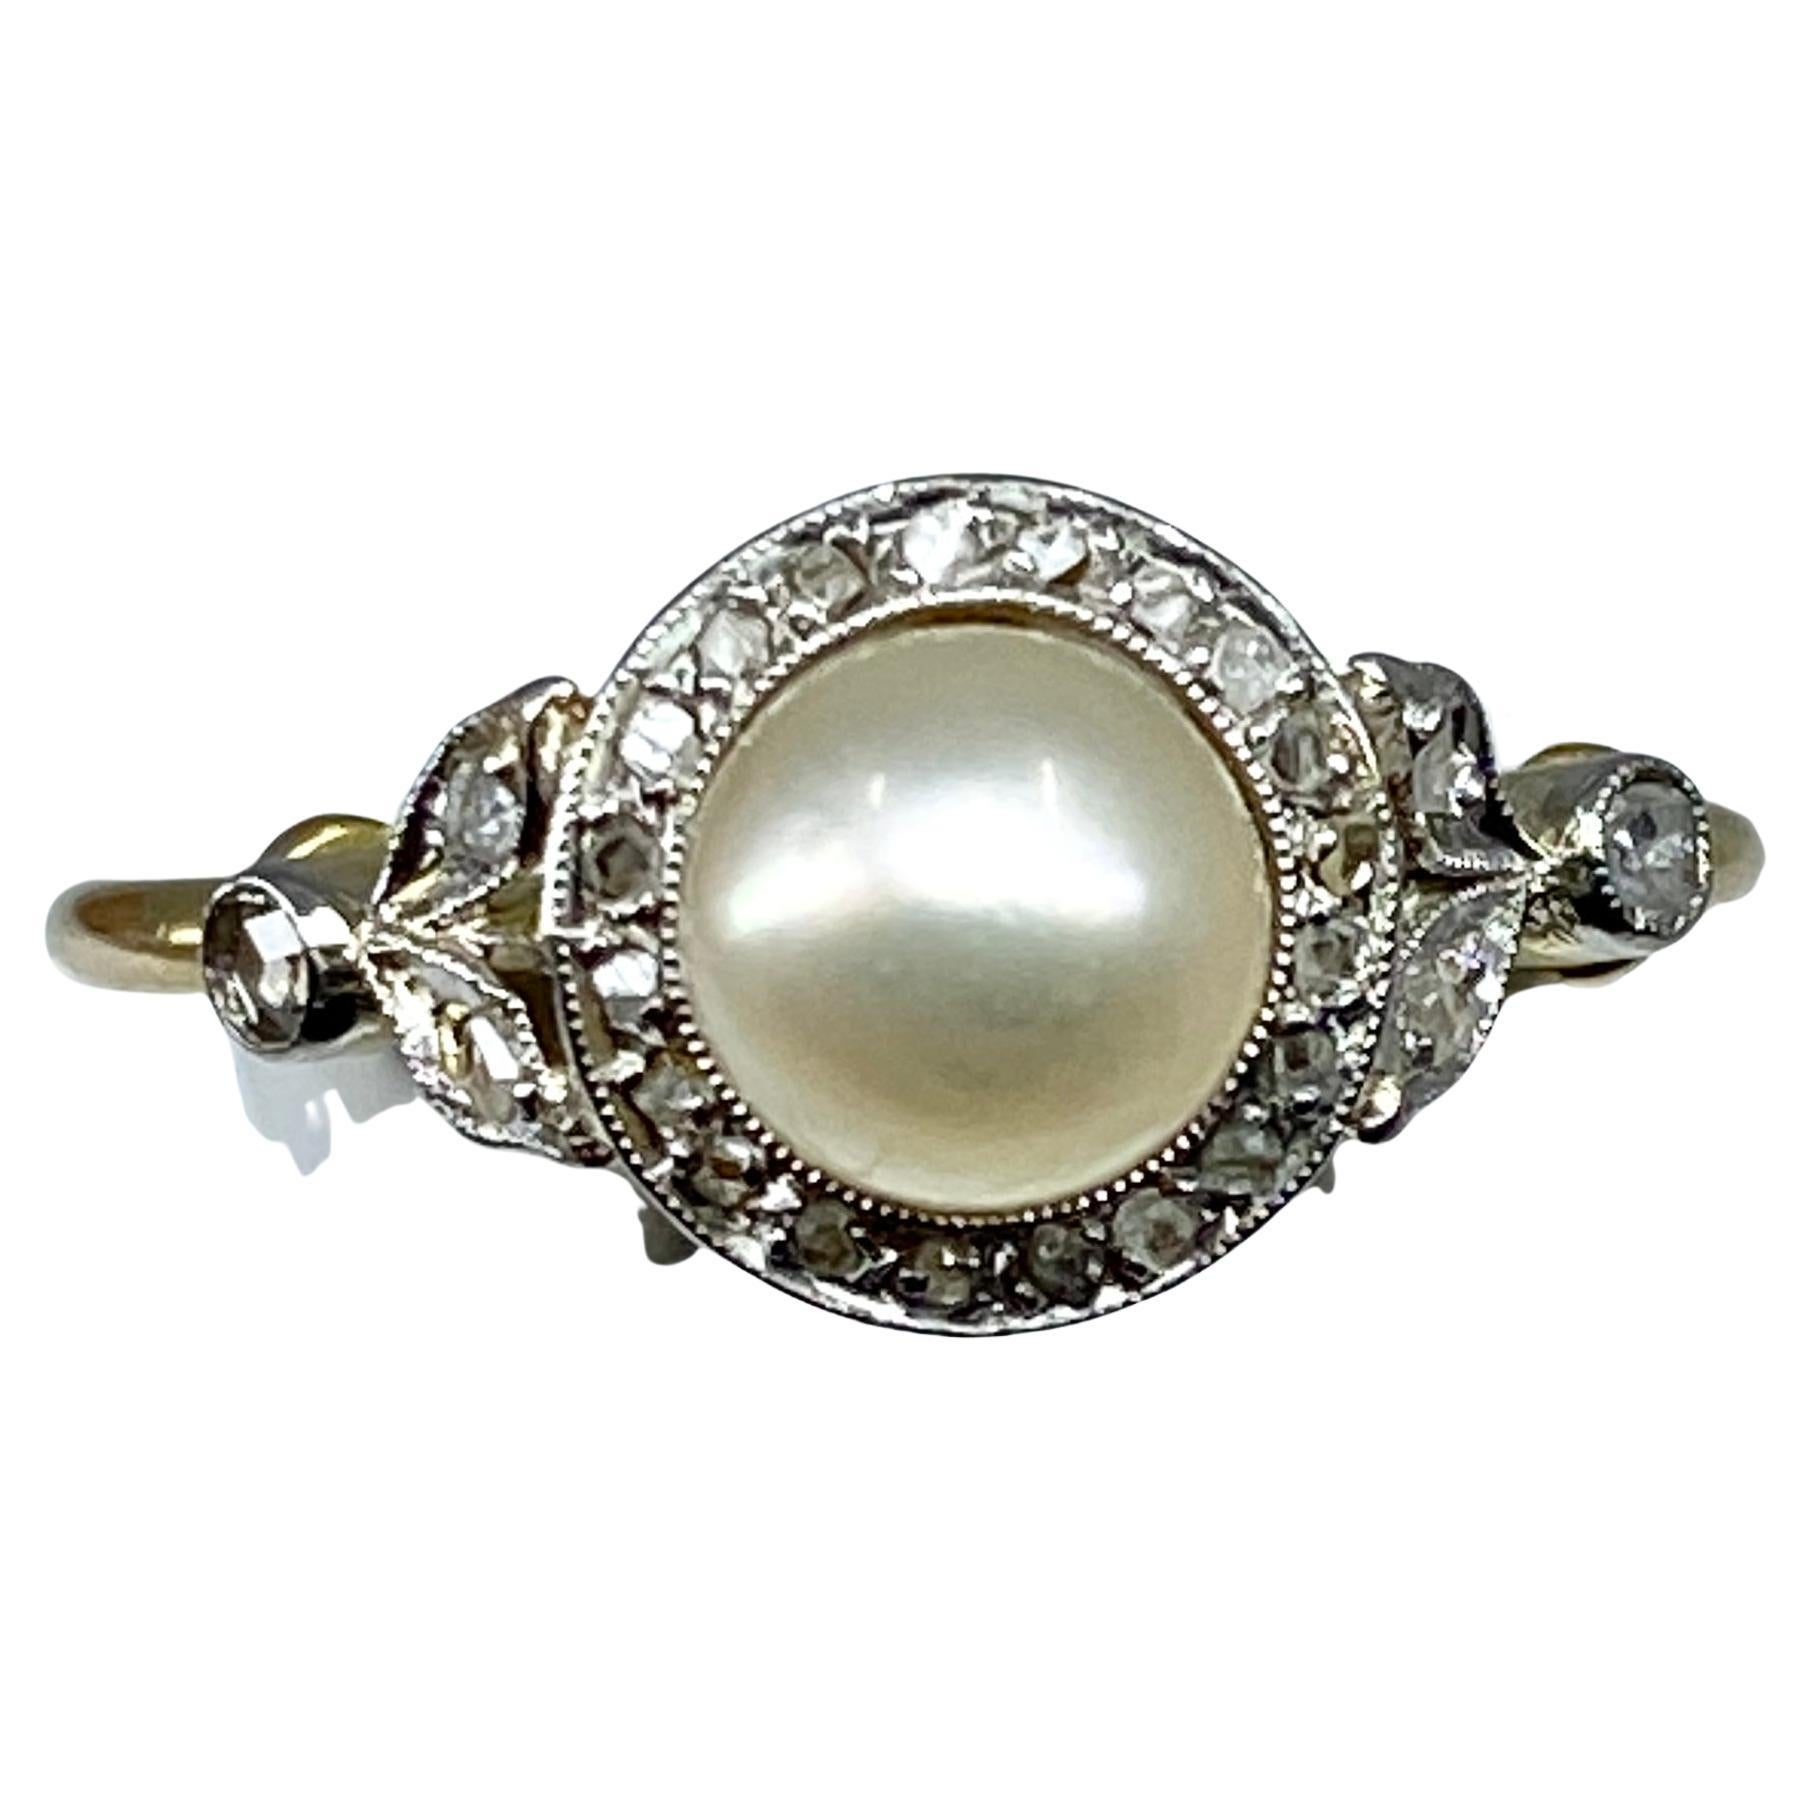 18 carat gold ring set with a pearl and diamonds, 1900 period.